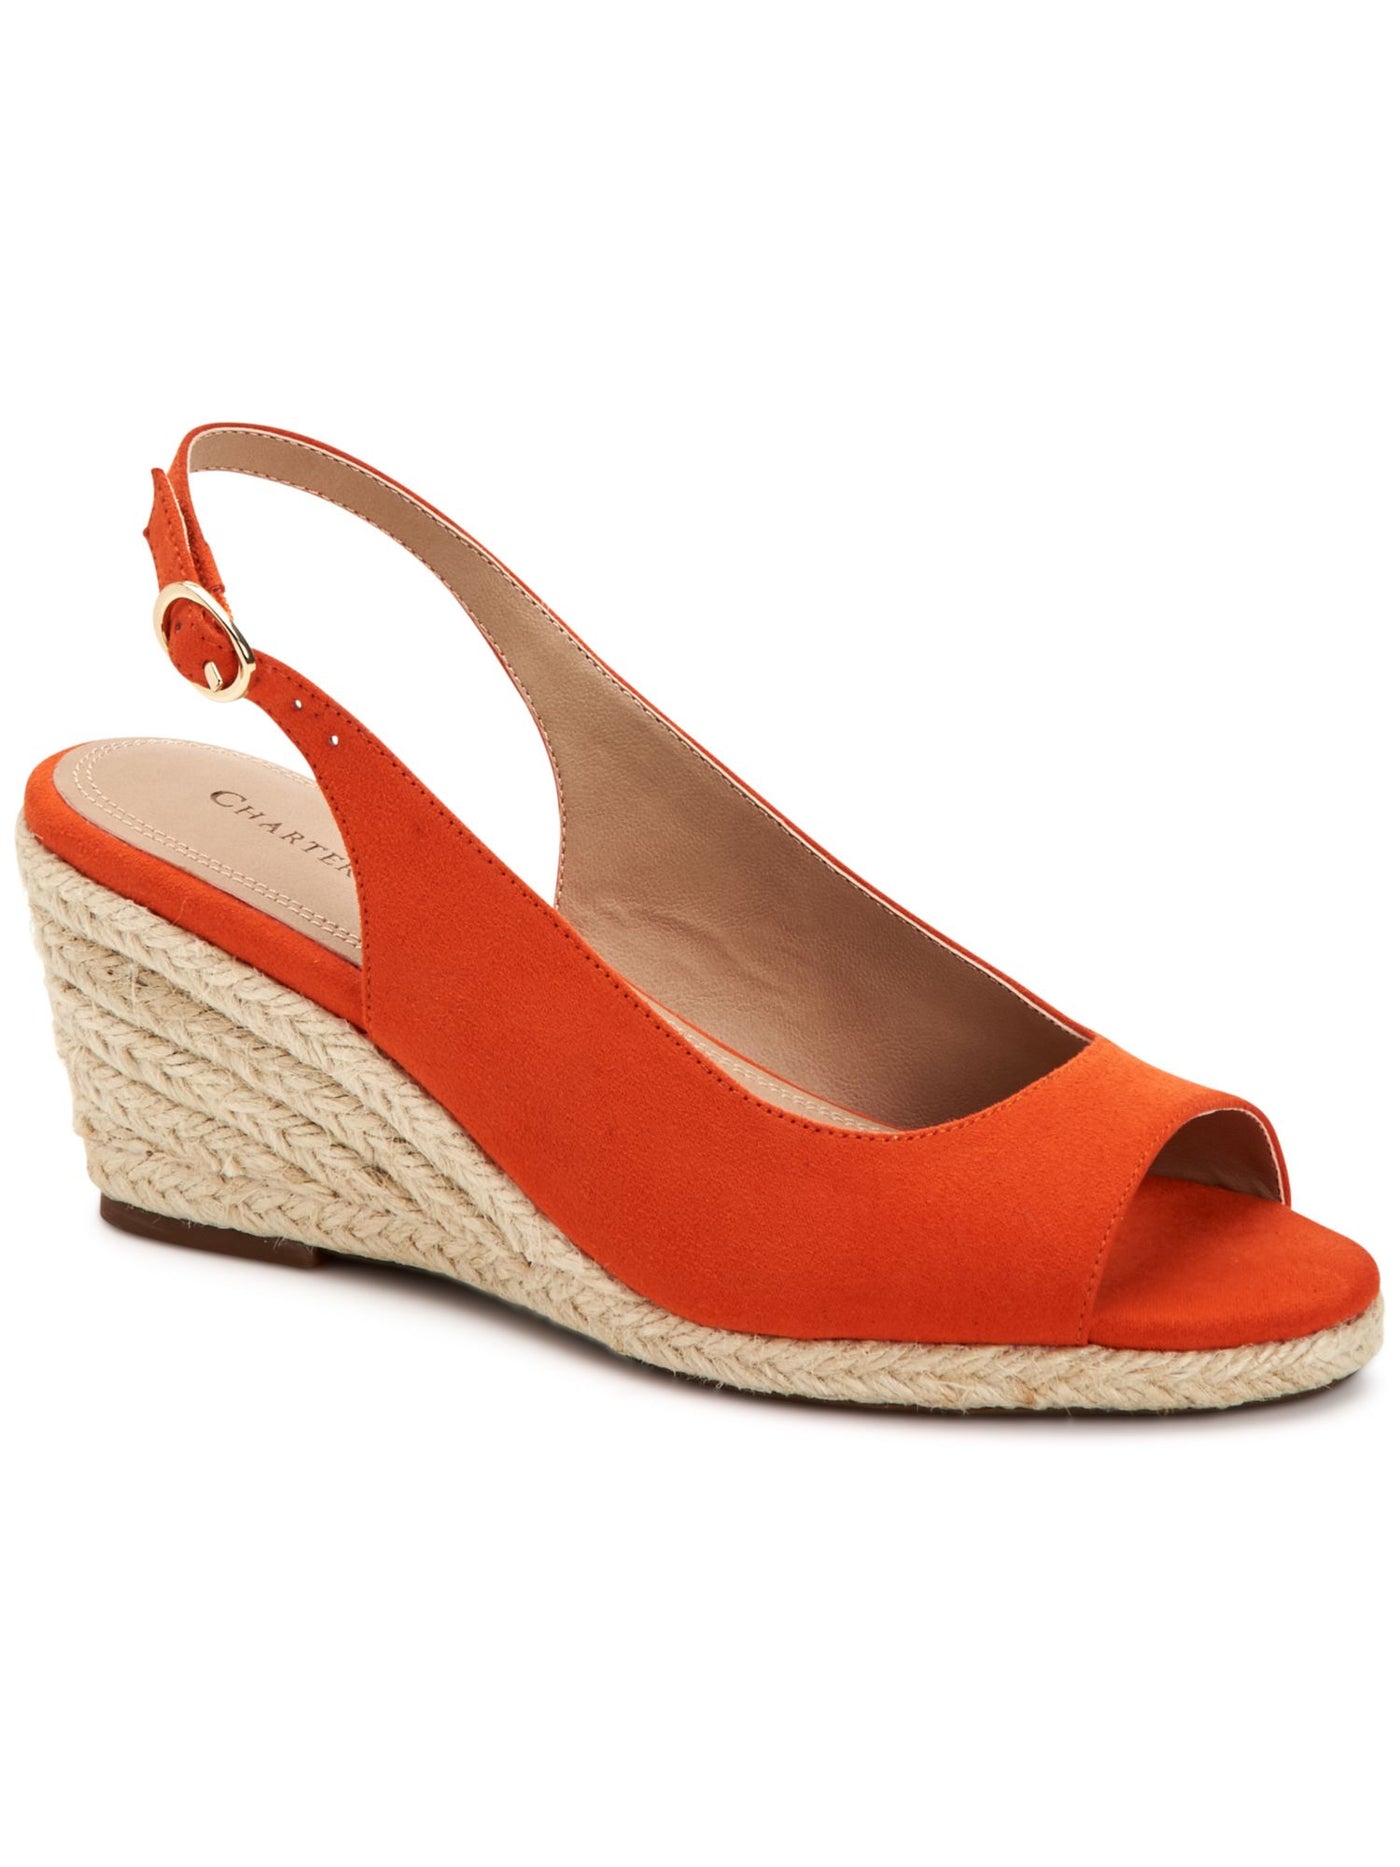 CHARTER CLUB Womens Orange Padded Ankle Strap Tamaare Round Toe Wedge Buckle Espadrille Shoes 5.5 M